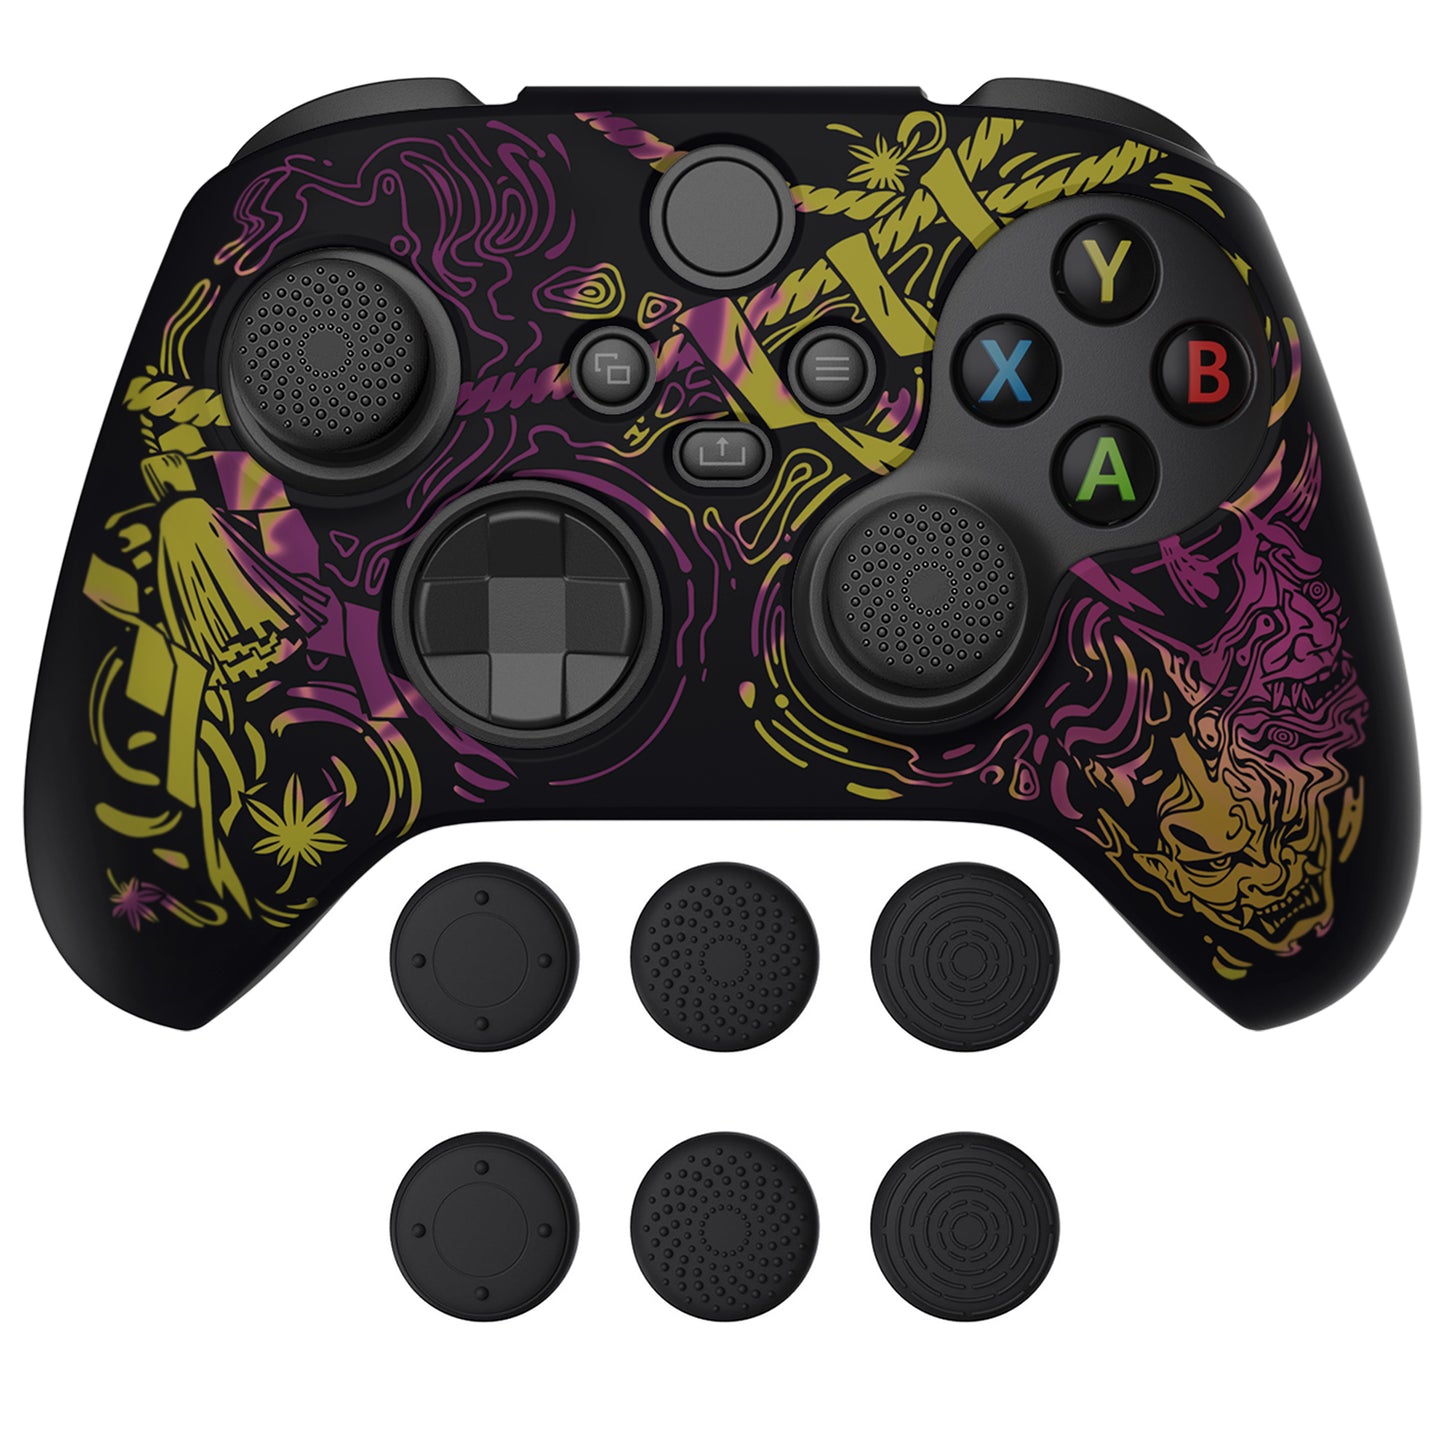 PlayVital Water Transfer Printing Samurai Prajna (Purple & Yellow) Silicone Cover Skin for Xbox Series X/S Controller, Soft Rubber Case Protector for Xbox Series X/S, Xbox Core Controller wtih 6 Thumb Grip Caps - BLX3026 PlayVital